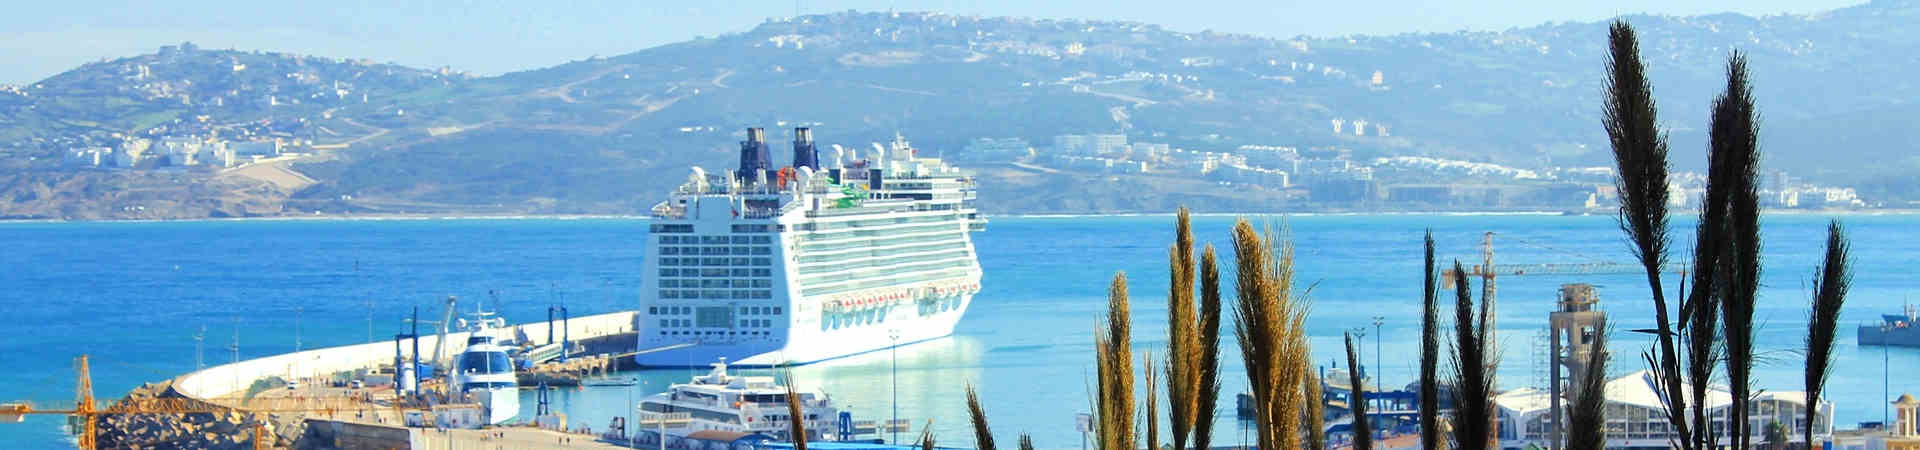 Resource image of the destination port Tanger Med for the ferry route Sète - Tanger Med